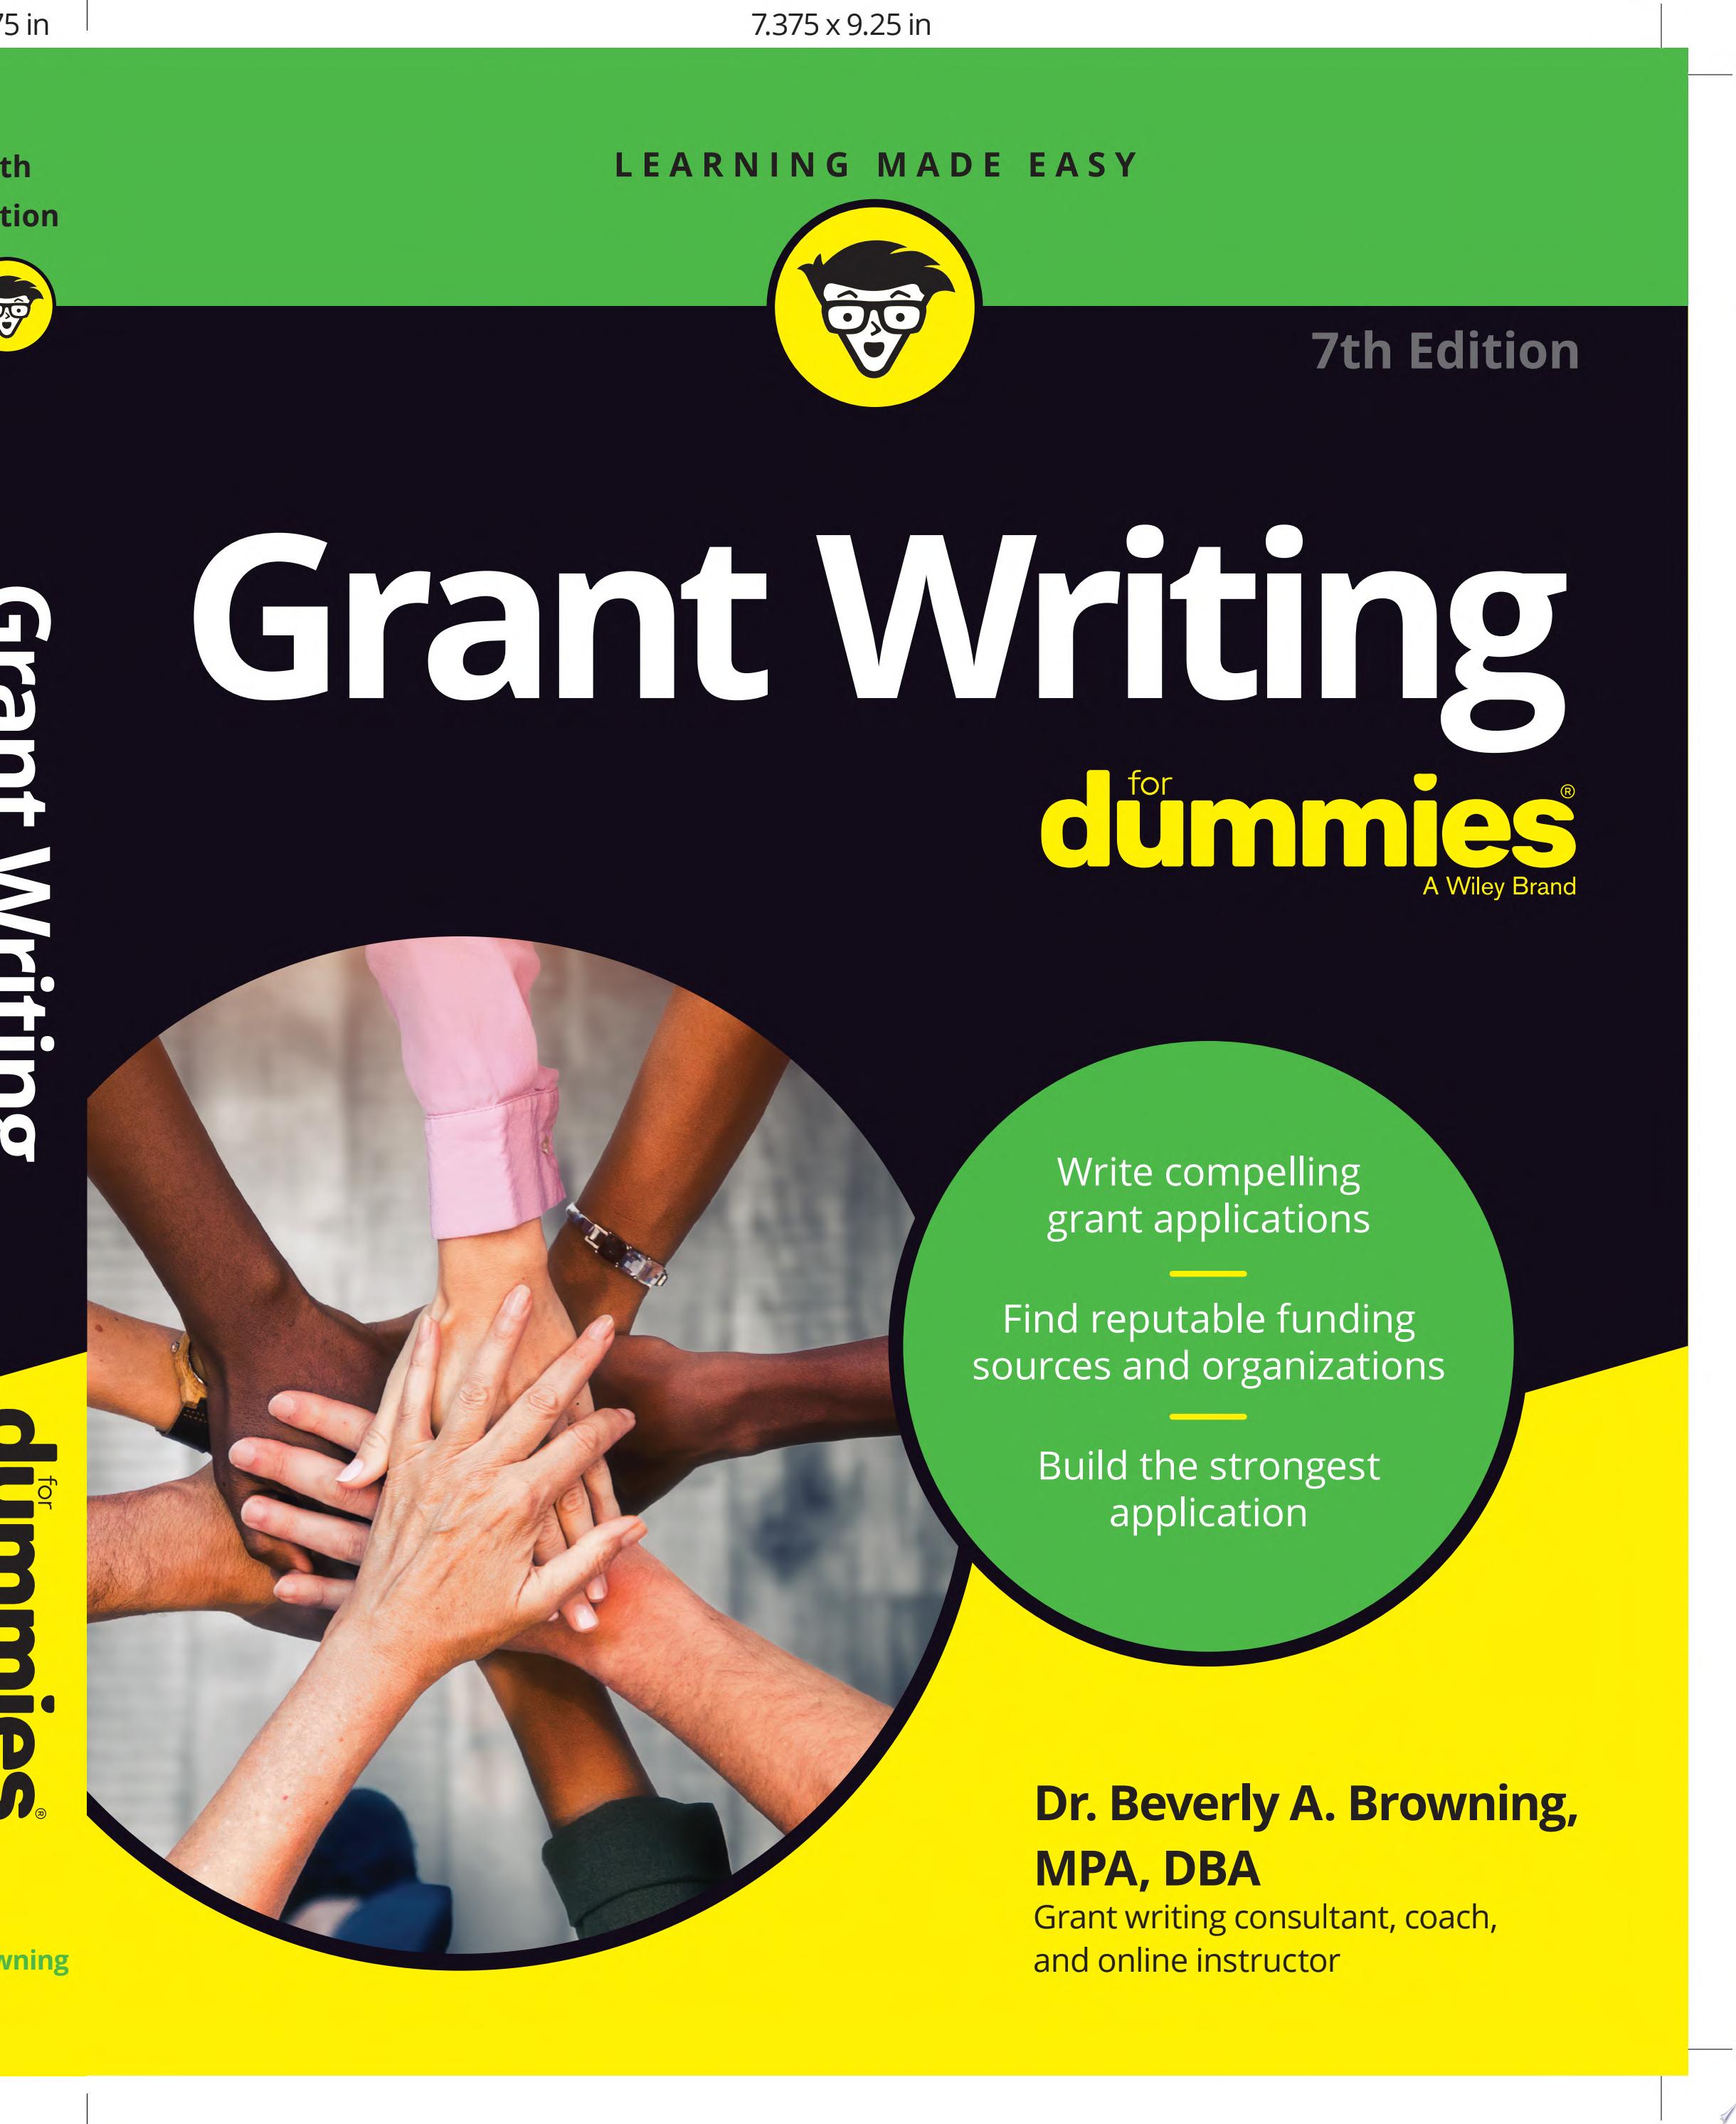 Image for "Grant Writing For Dummies"